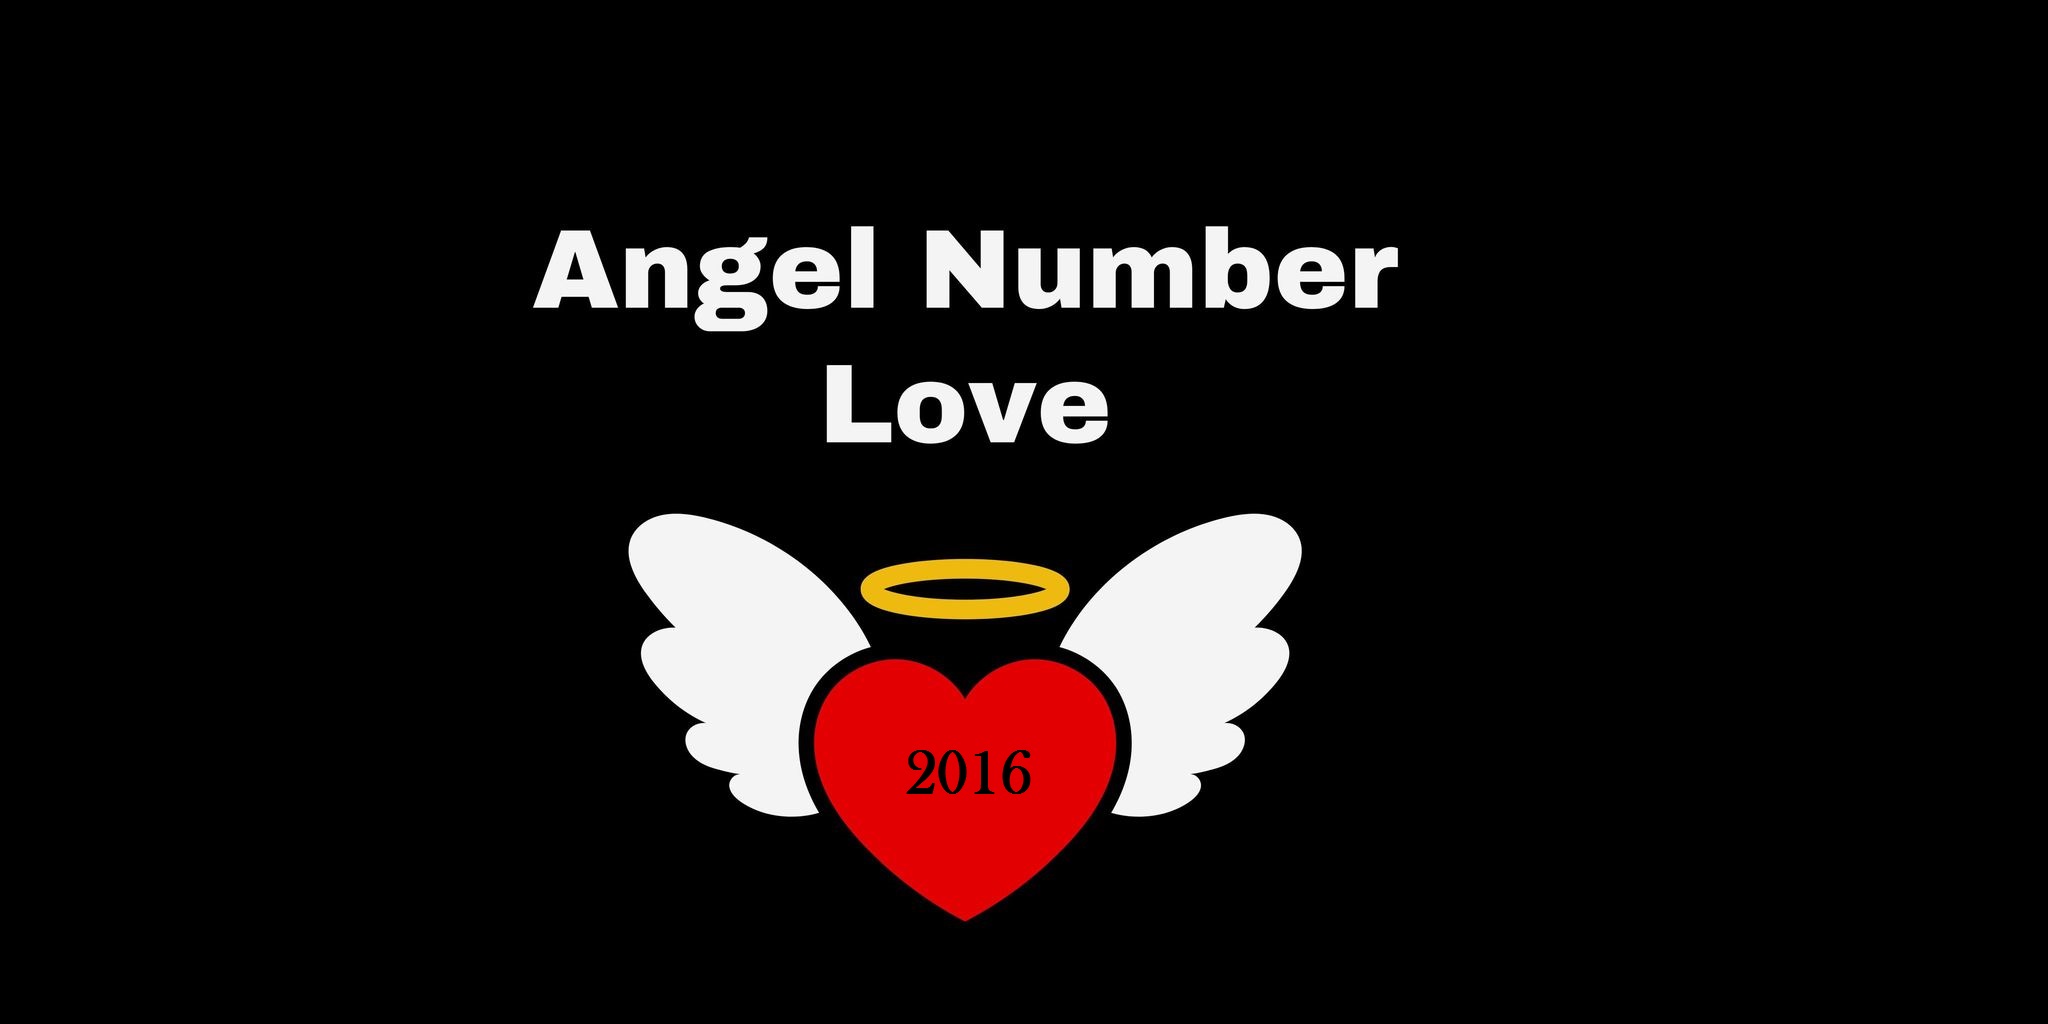 2016 Angel Number Meaning In Love